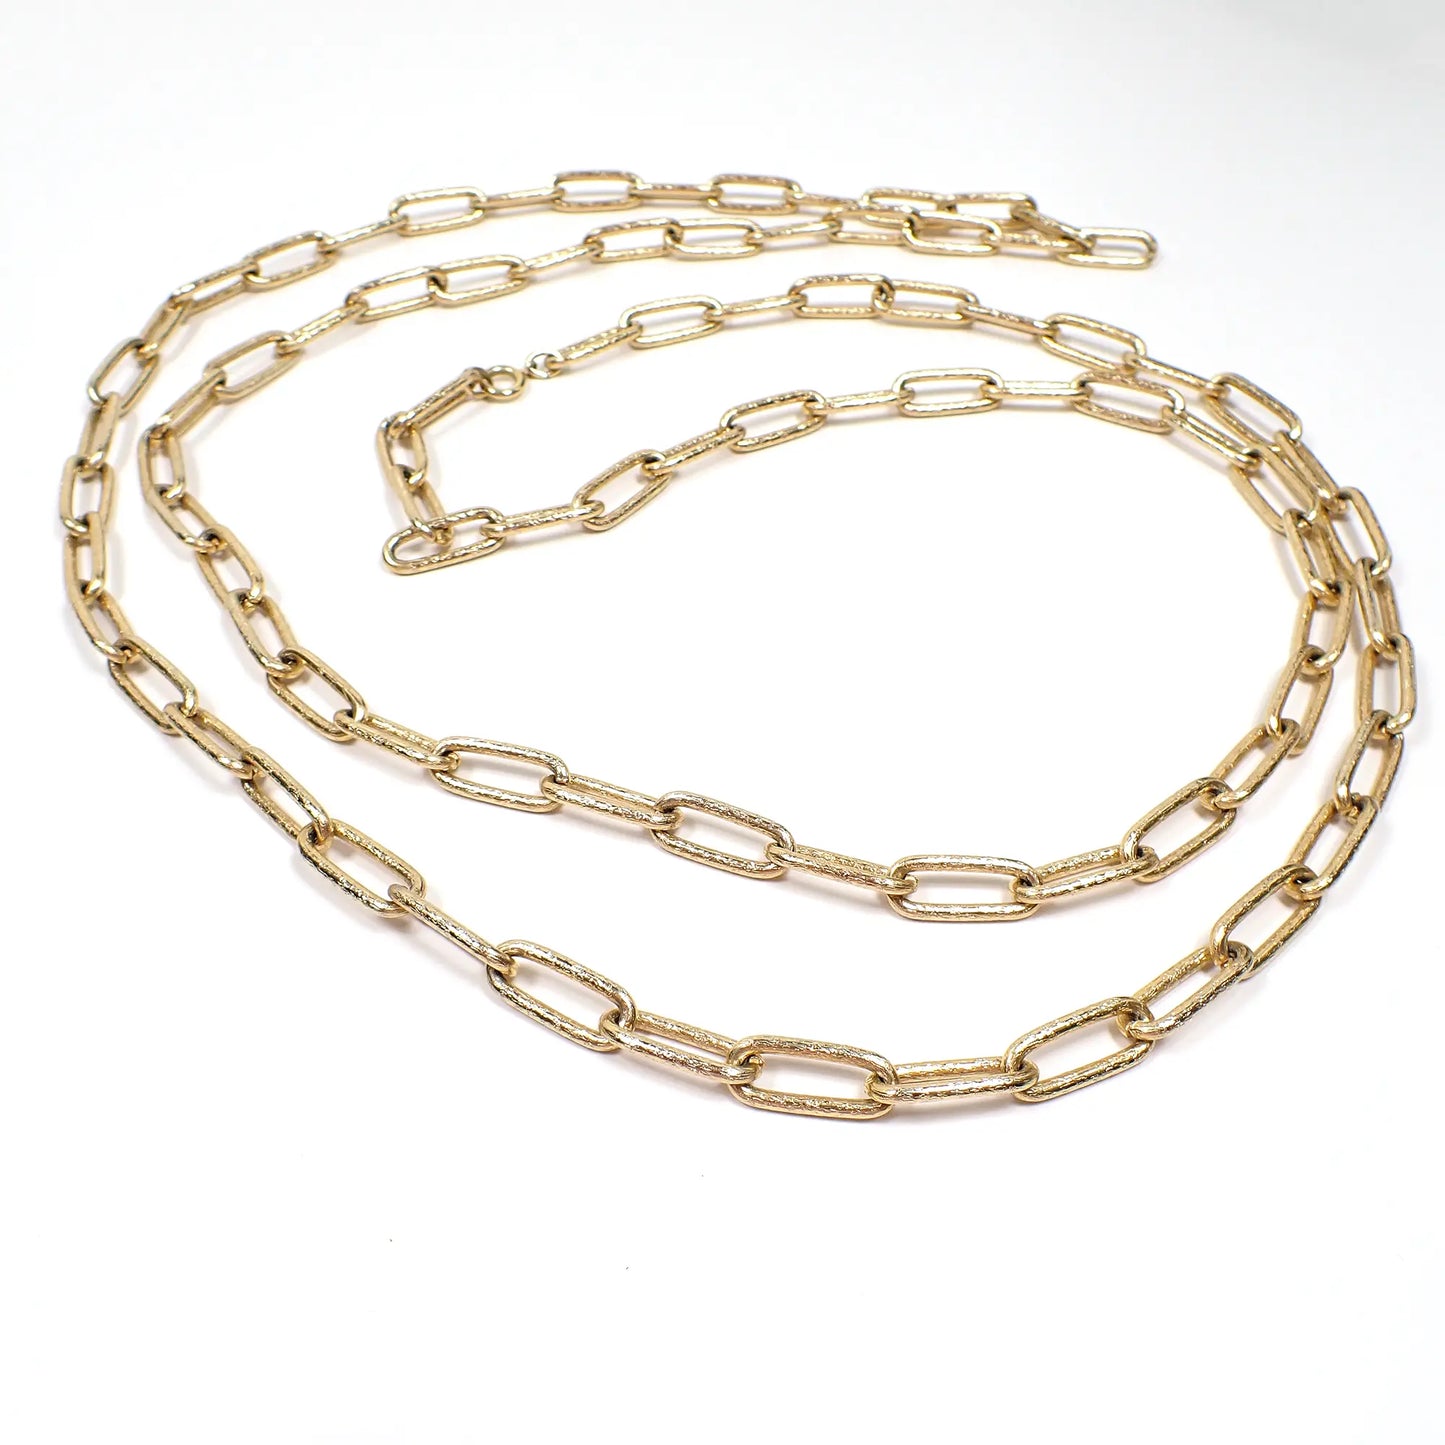 Very Long Textured Gold Tone Oval Link Vintage Cable Chain Necklace